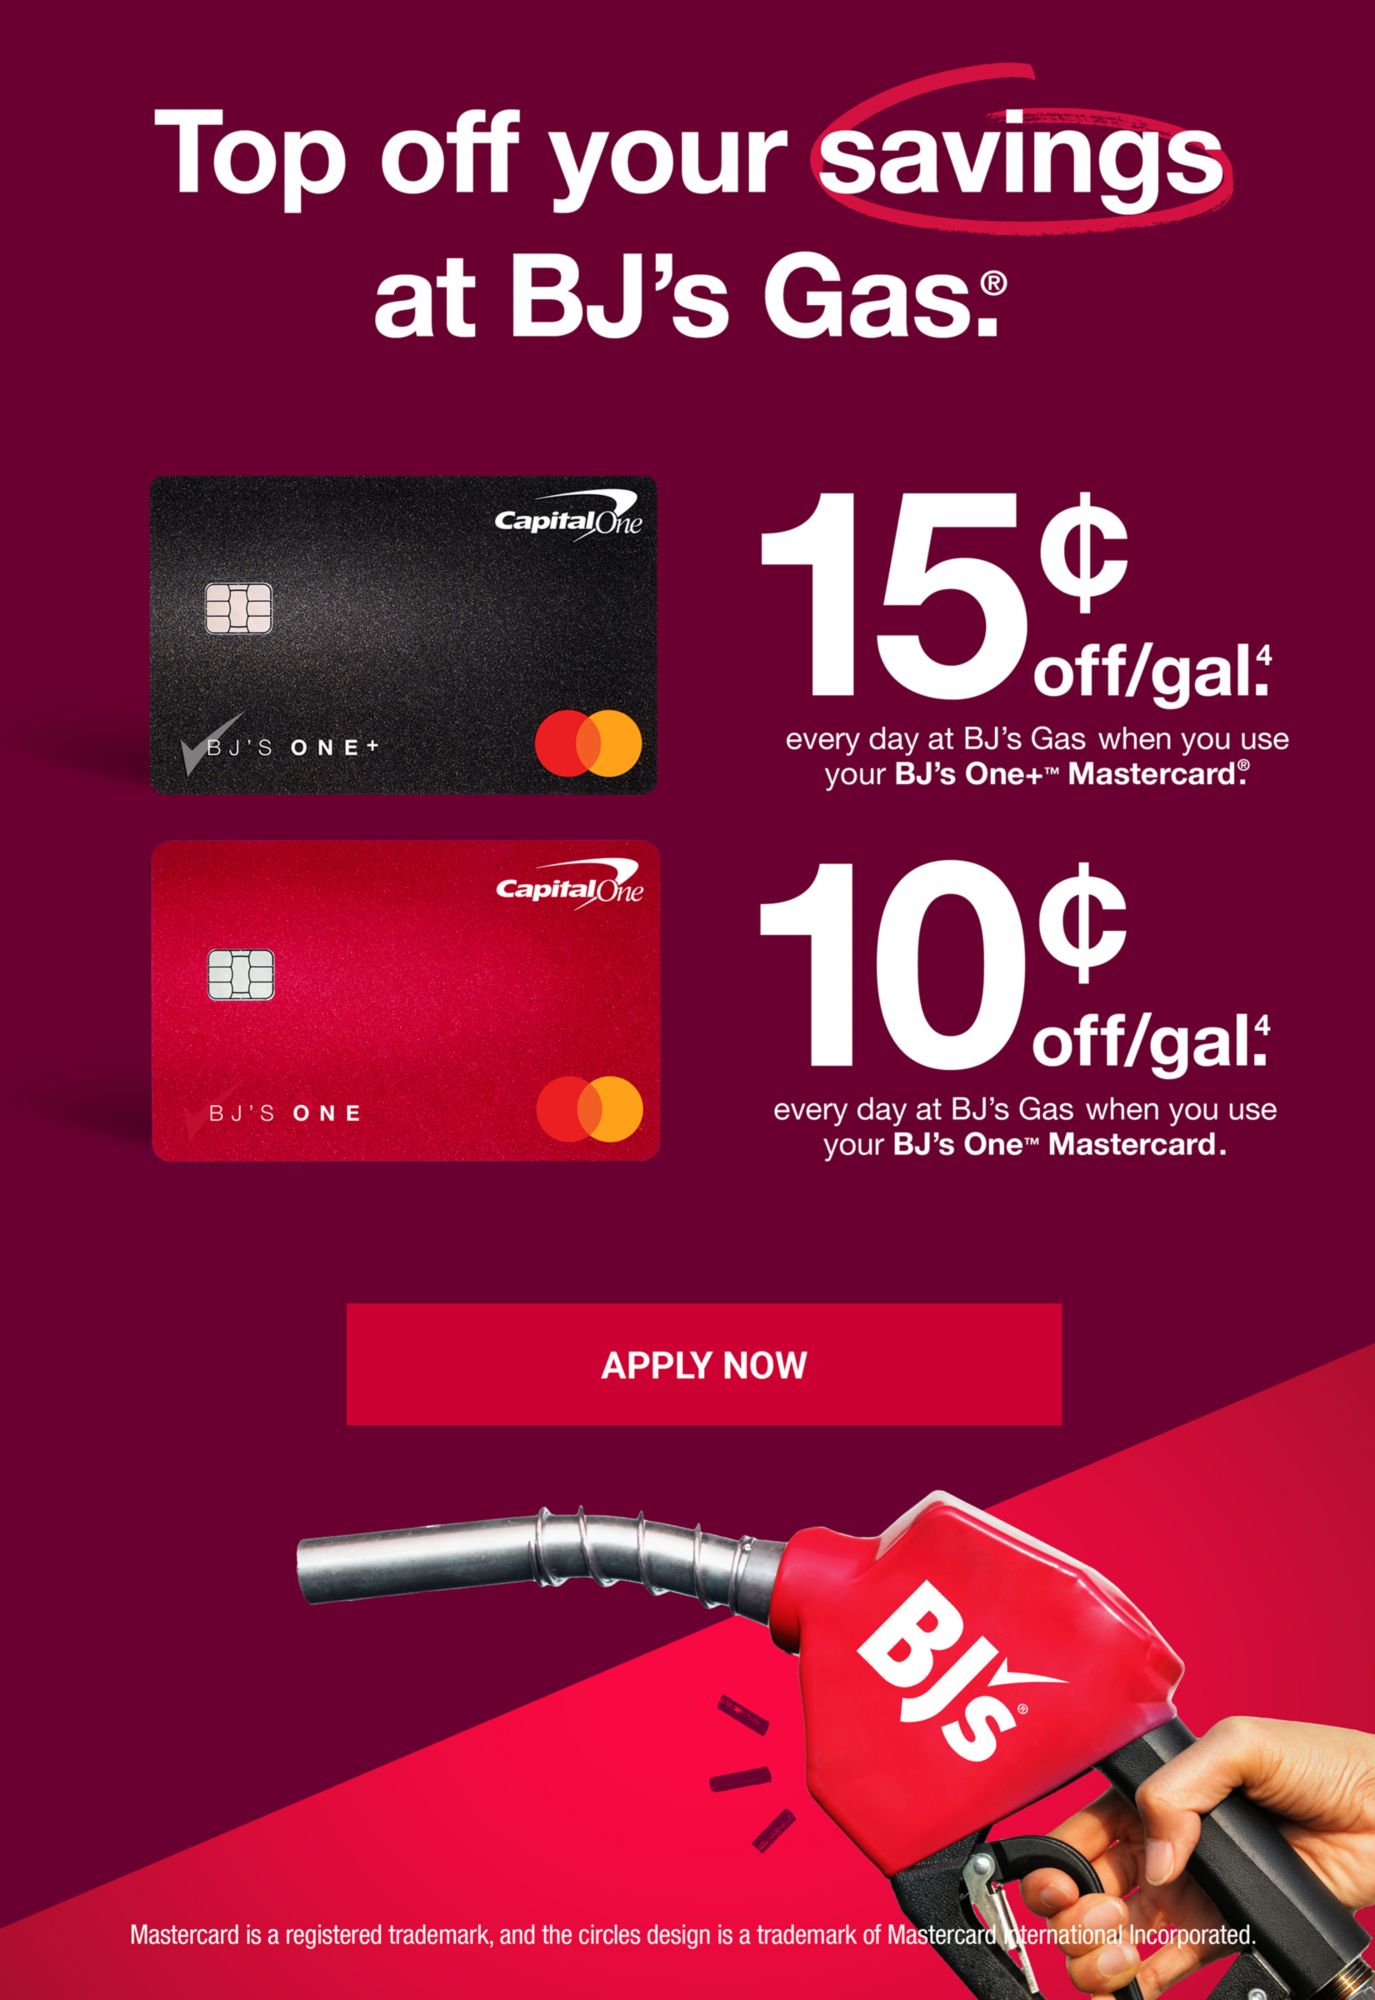 Top off your savings at BJ's Gas. 15 cents off/gal(4) every day at BJ's Gas when you use your BJ's One+ Mastercard. 10 cents off/gal(4) every day at BJ's Gas when you use your BJ's One Mastercard. Click to apply now.